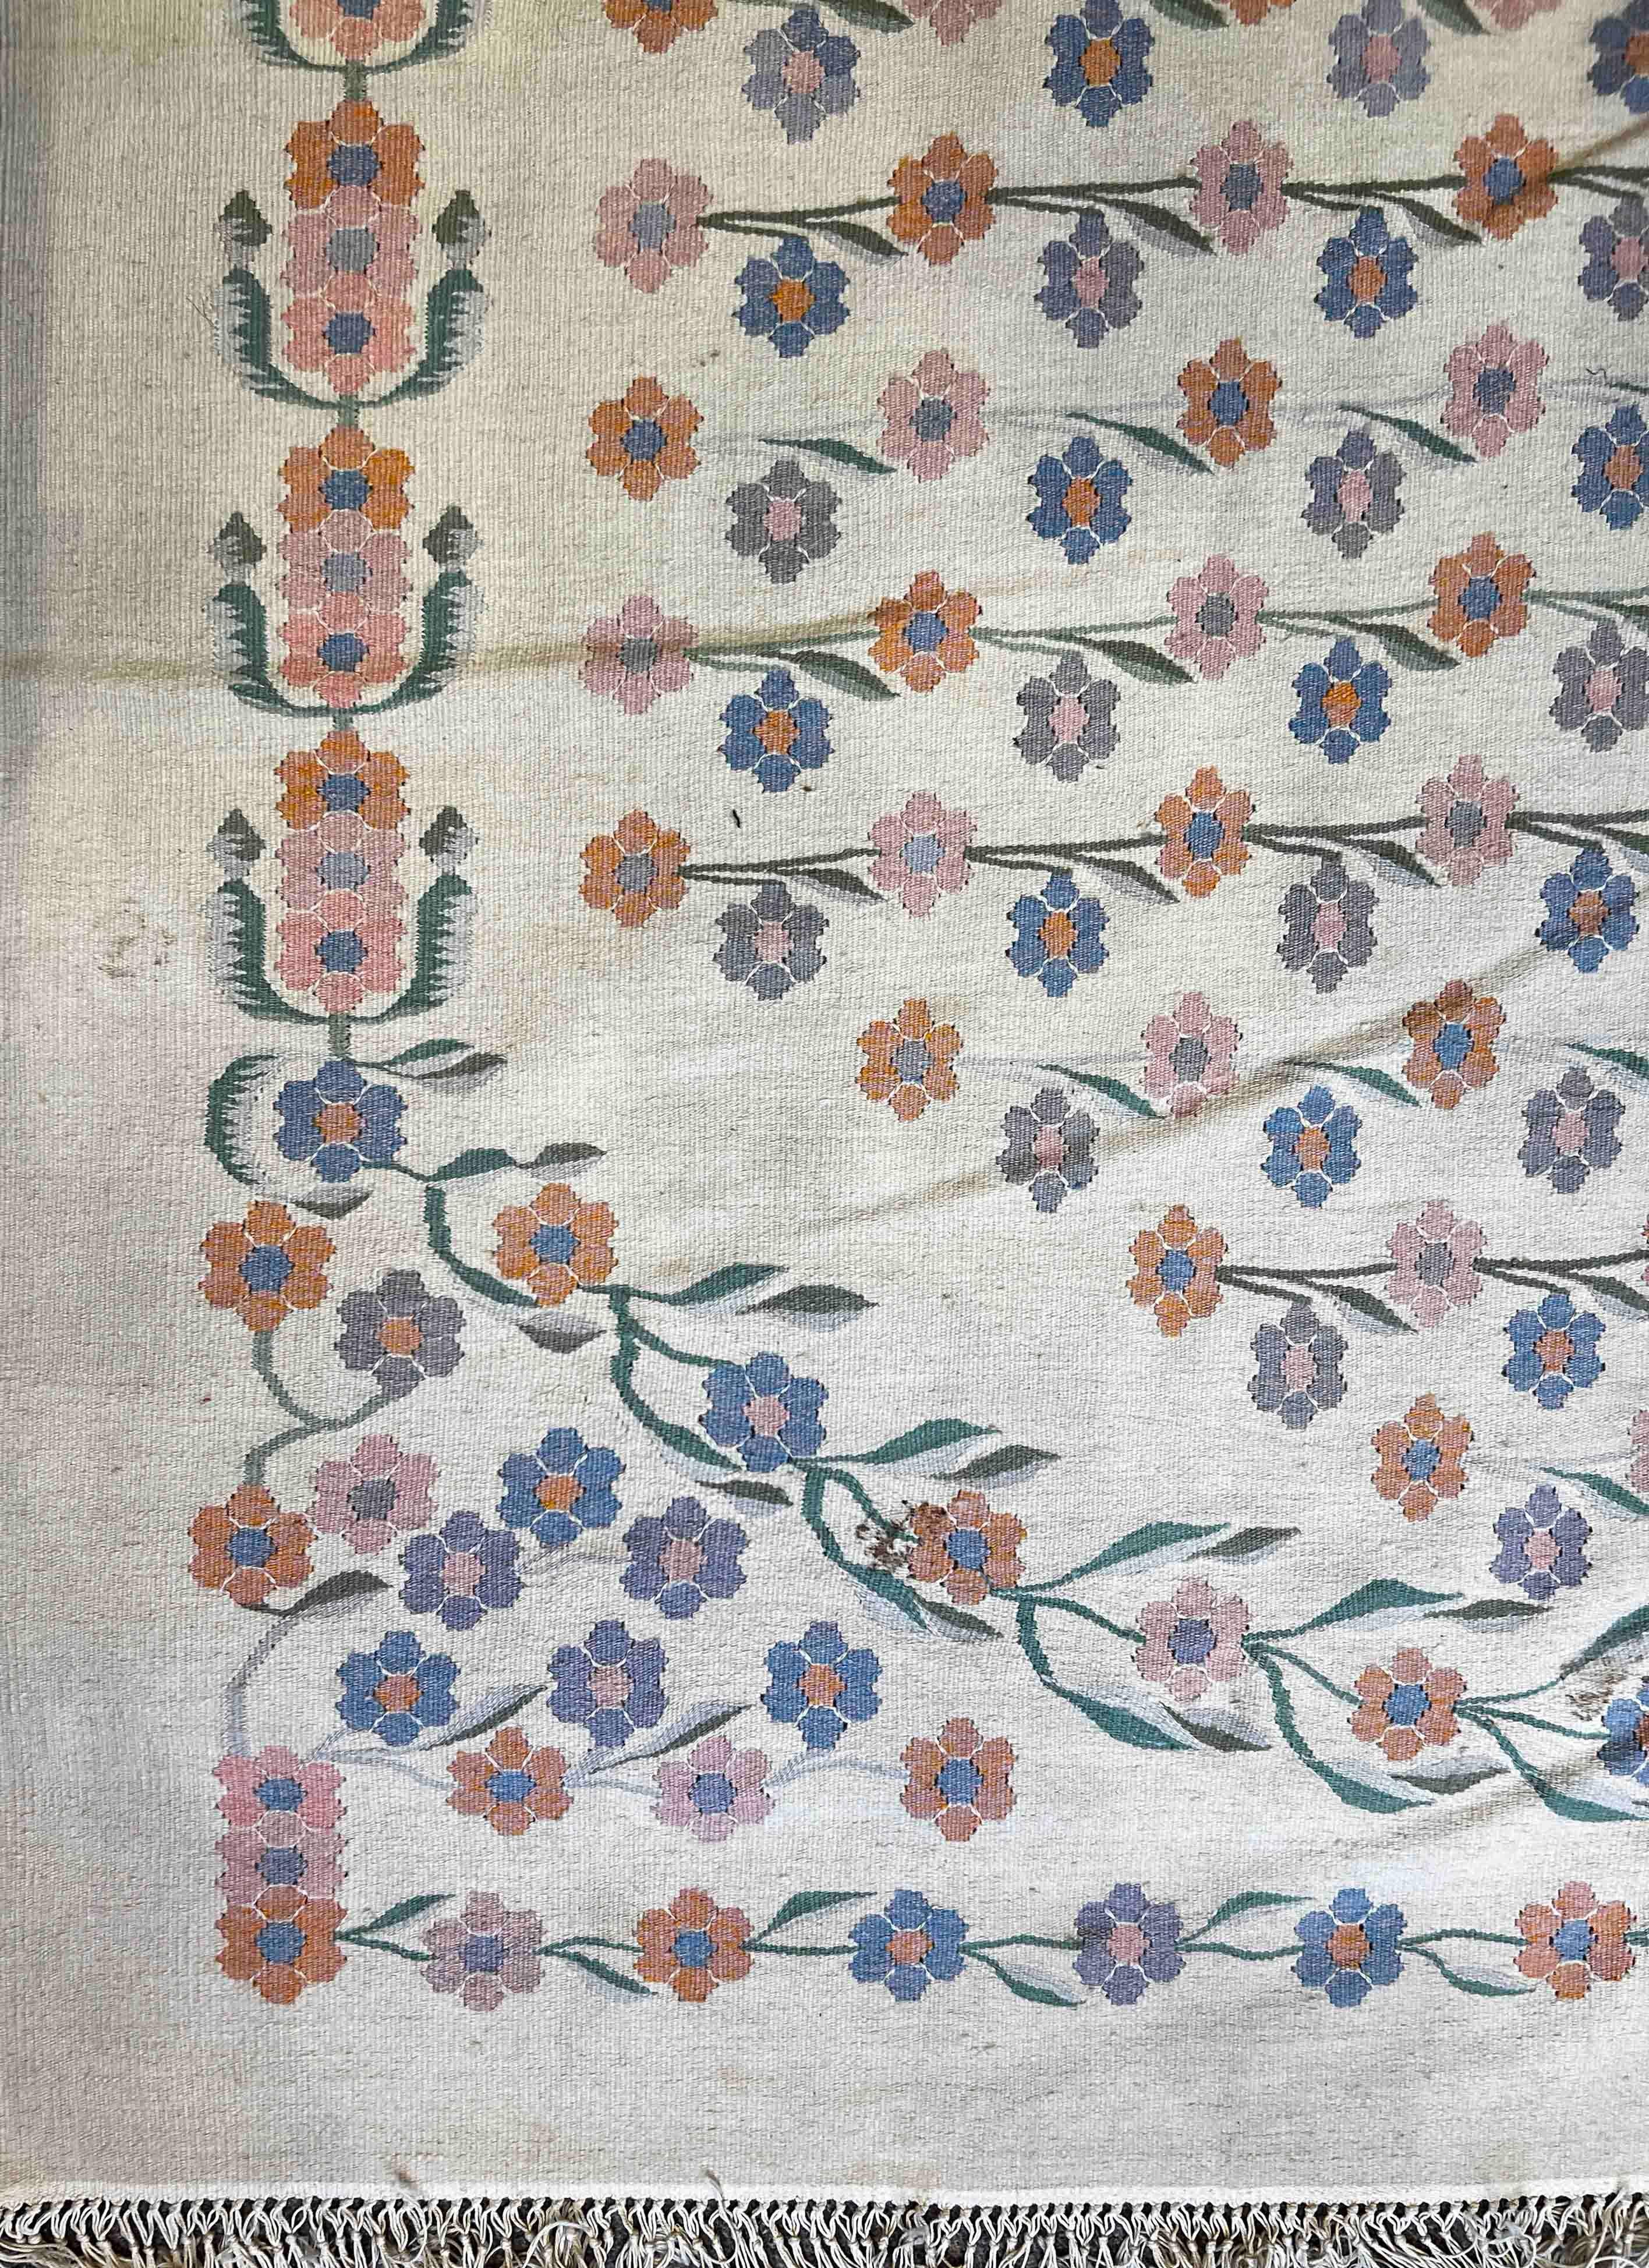 Old Turkish kilim circa 1950 - N°753
Close to the Eiffel Tower, We are a family business specialized in the purchase, sale and expertise of
tapestries, carpets, kilims and textiles old, modern and contemporary.
We work for private clients, amateurs,